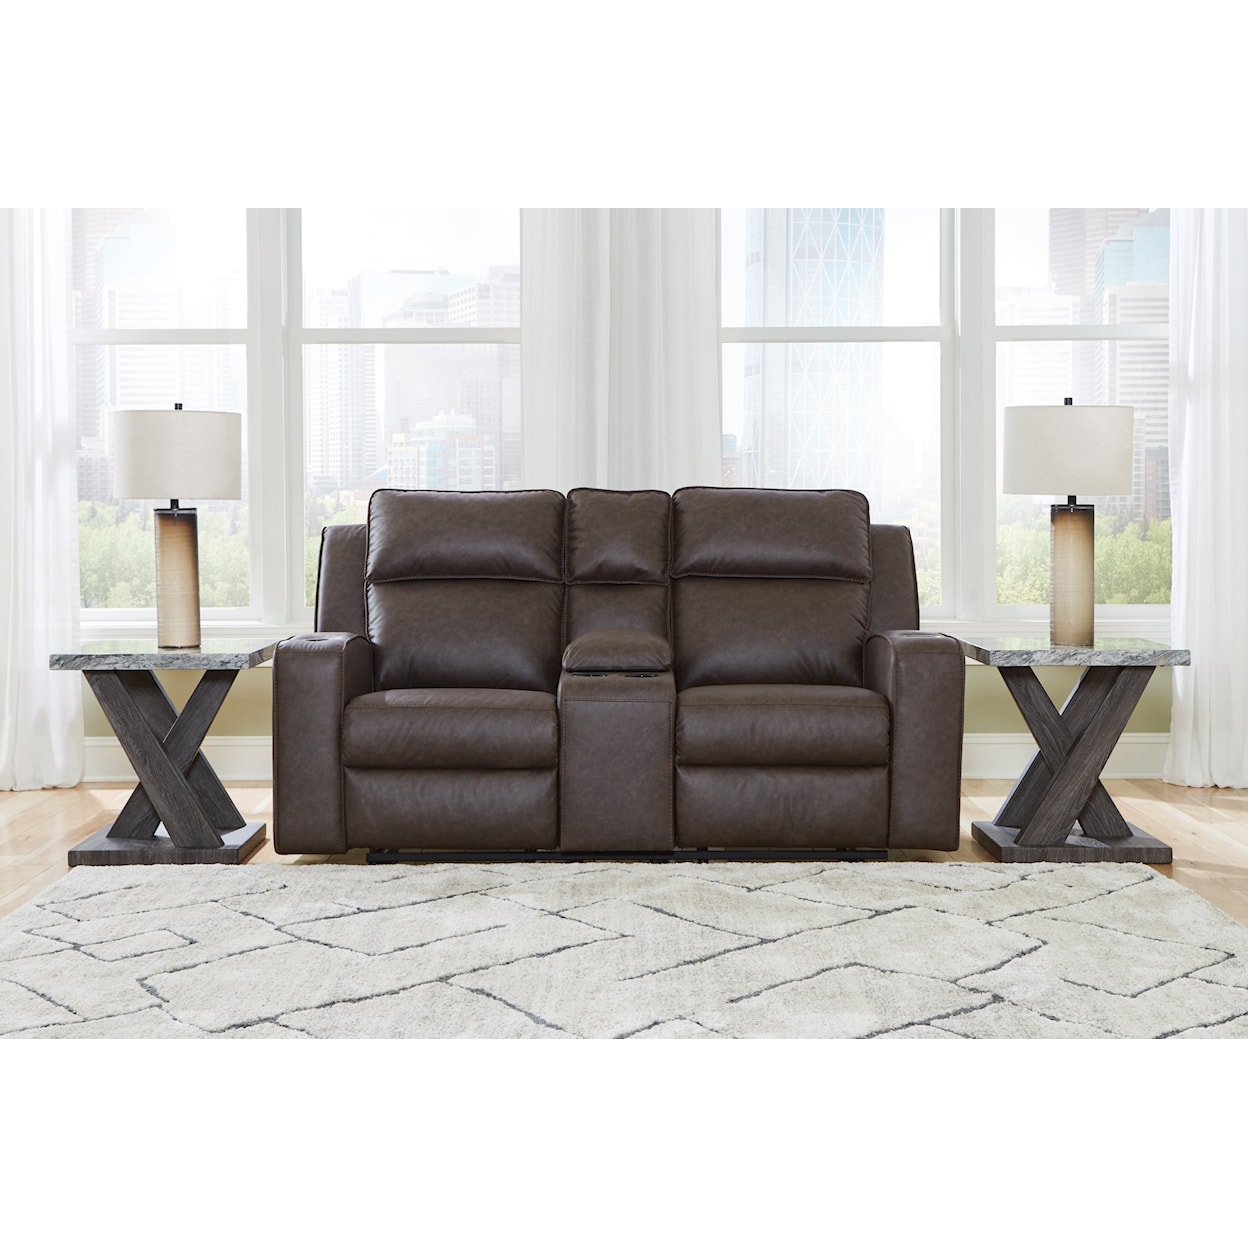 Signature Design by Ashley Furniture Lavenhorne Double Reclining Loveseat w/ Console